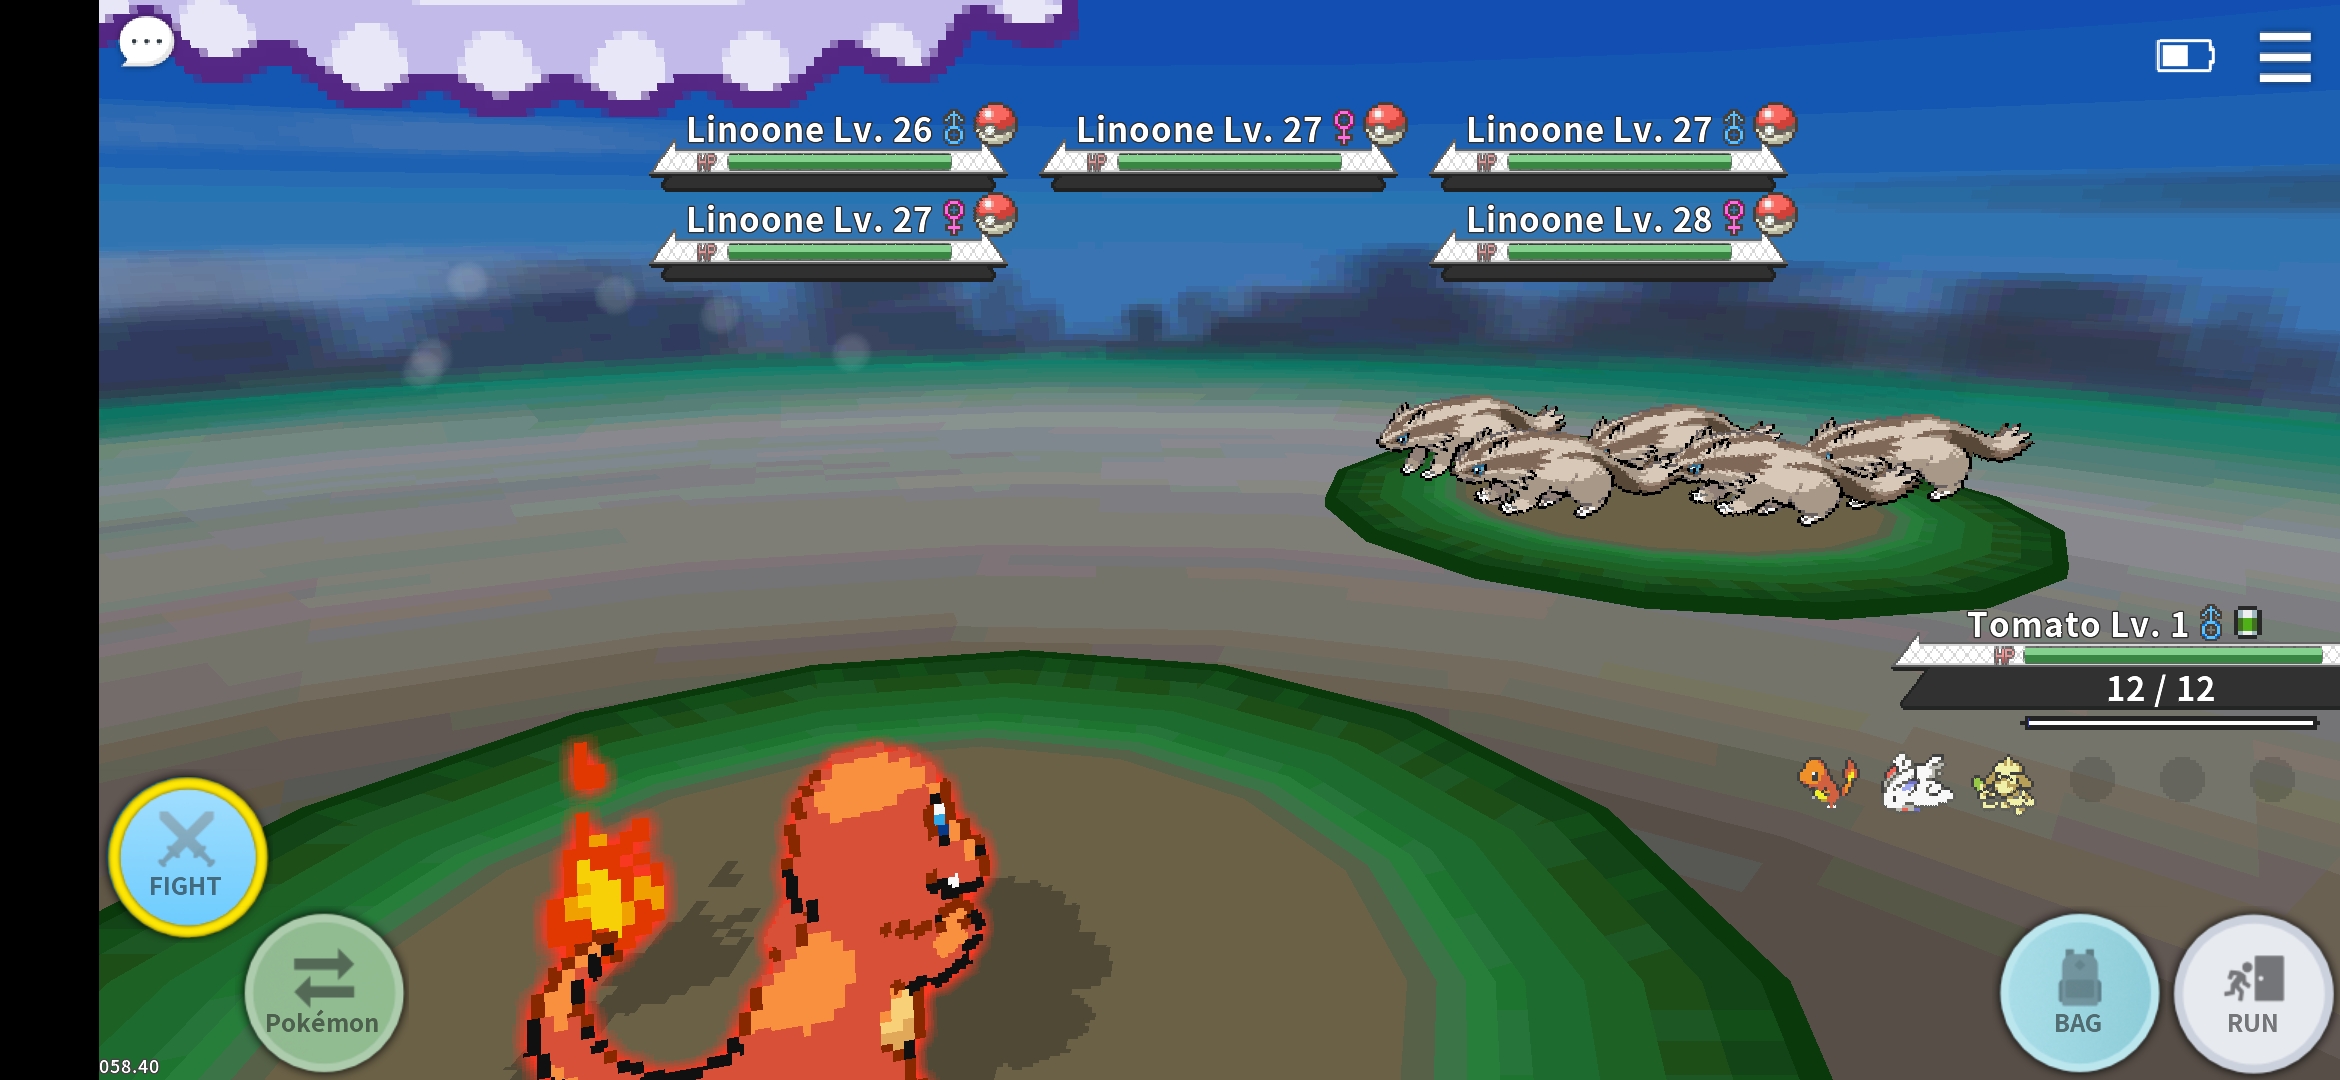 PokeMMO (Johto) Walkthrough Guide for Beginners - Blog About Life  Experiences